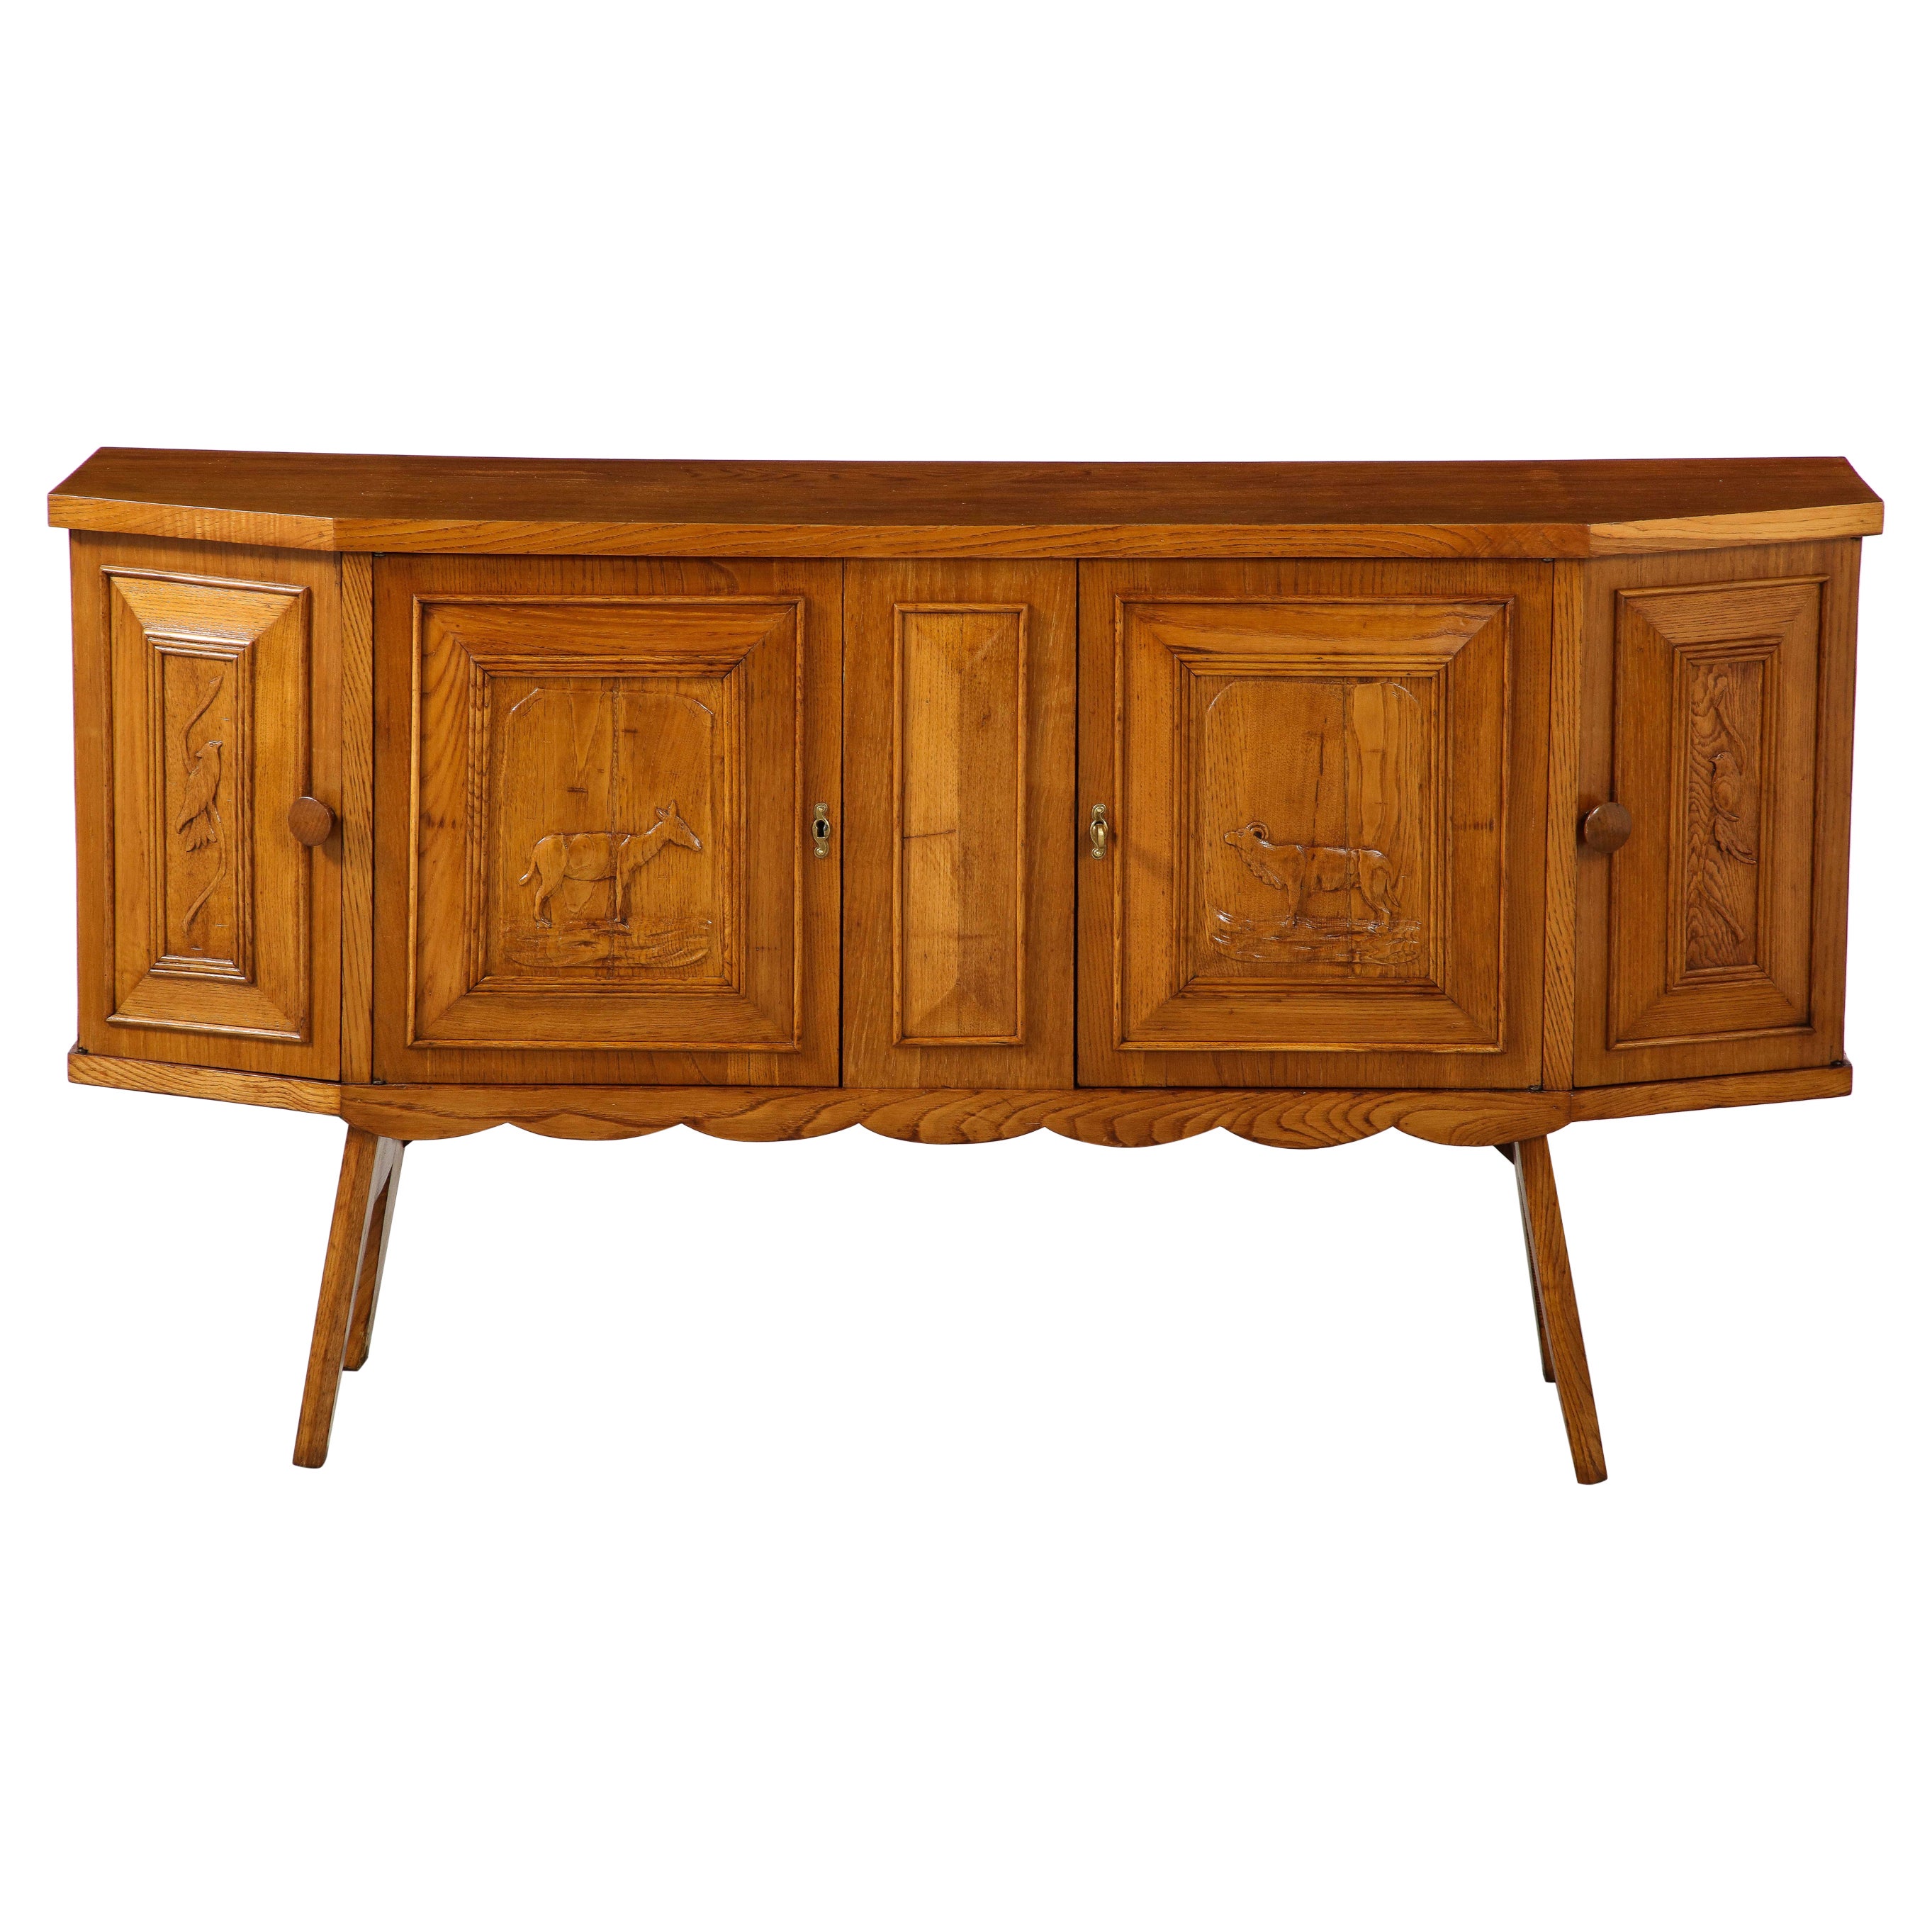 Italian Tuscan Art Deco Carved Oak Sideboard or Credenza, circa 1940 For Sale